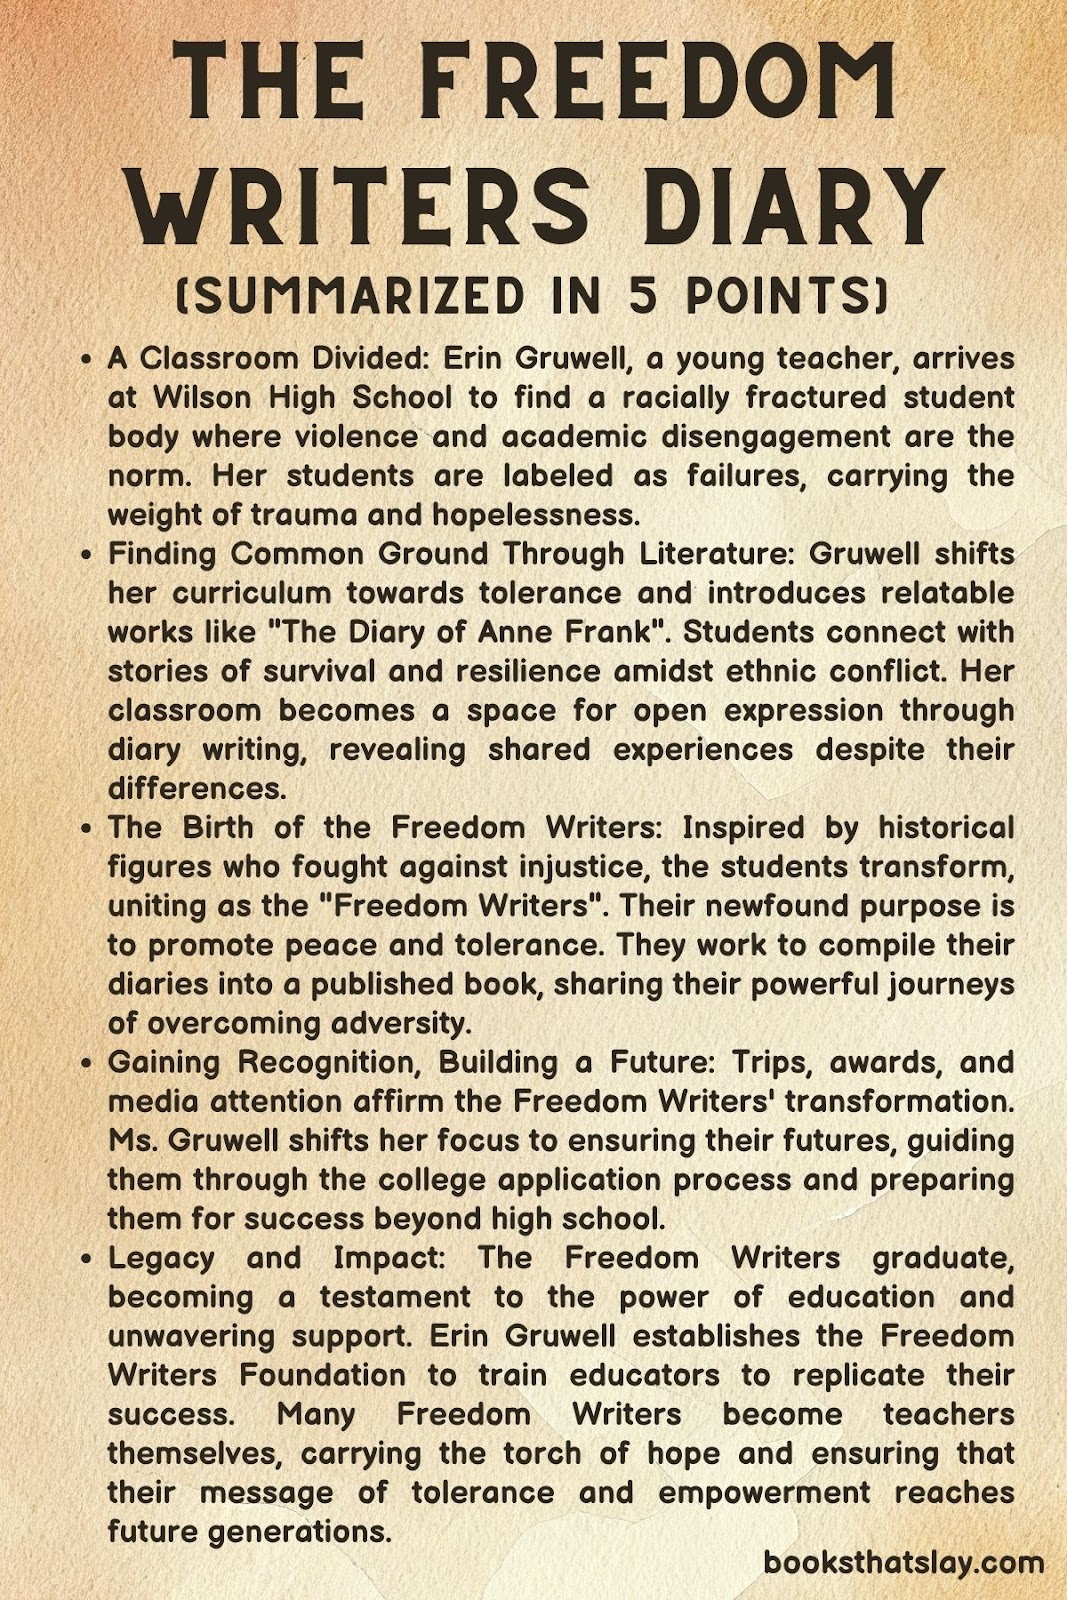 The Freedom Writers Diary Summary, Characters and Themes